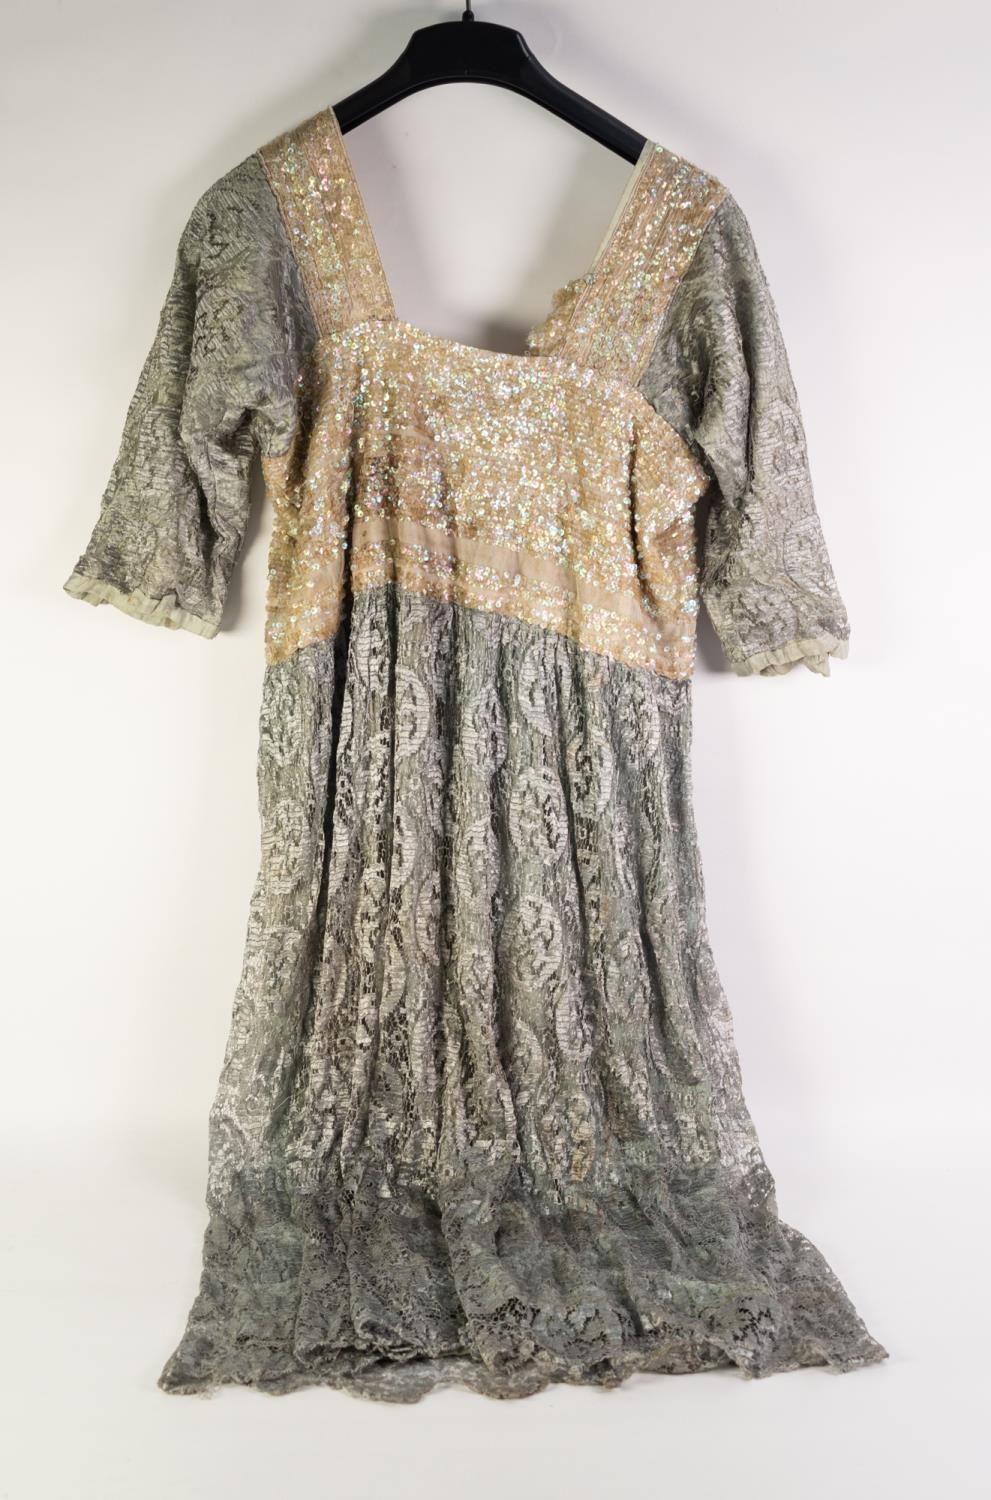 LADY'S VINTAGE EVENING DRESS with white net and sequinned bodice, pale blue net top, sleeves and